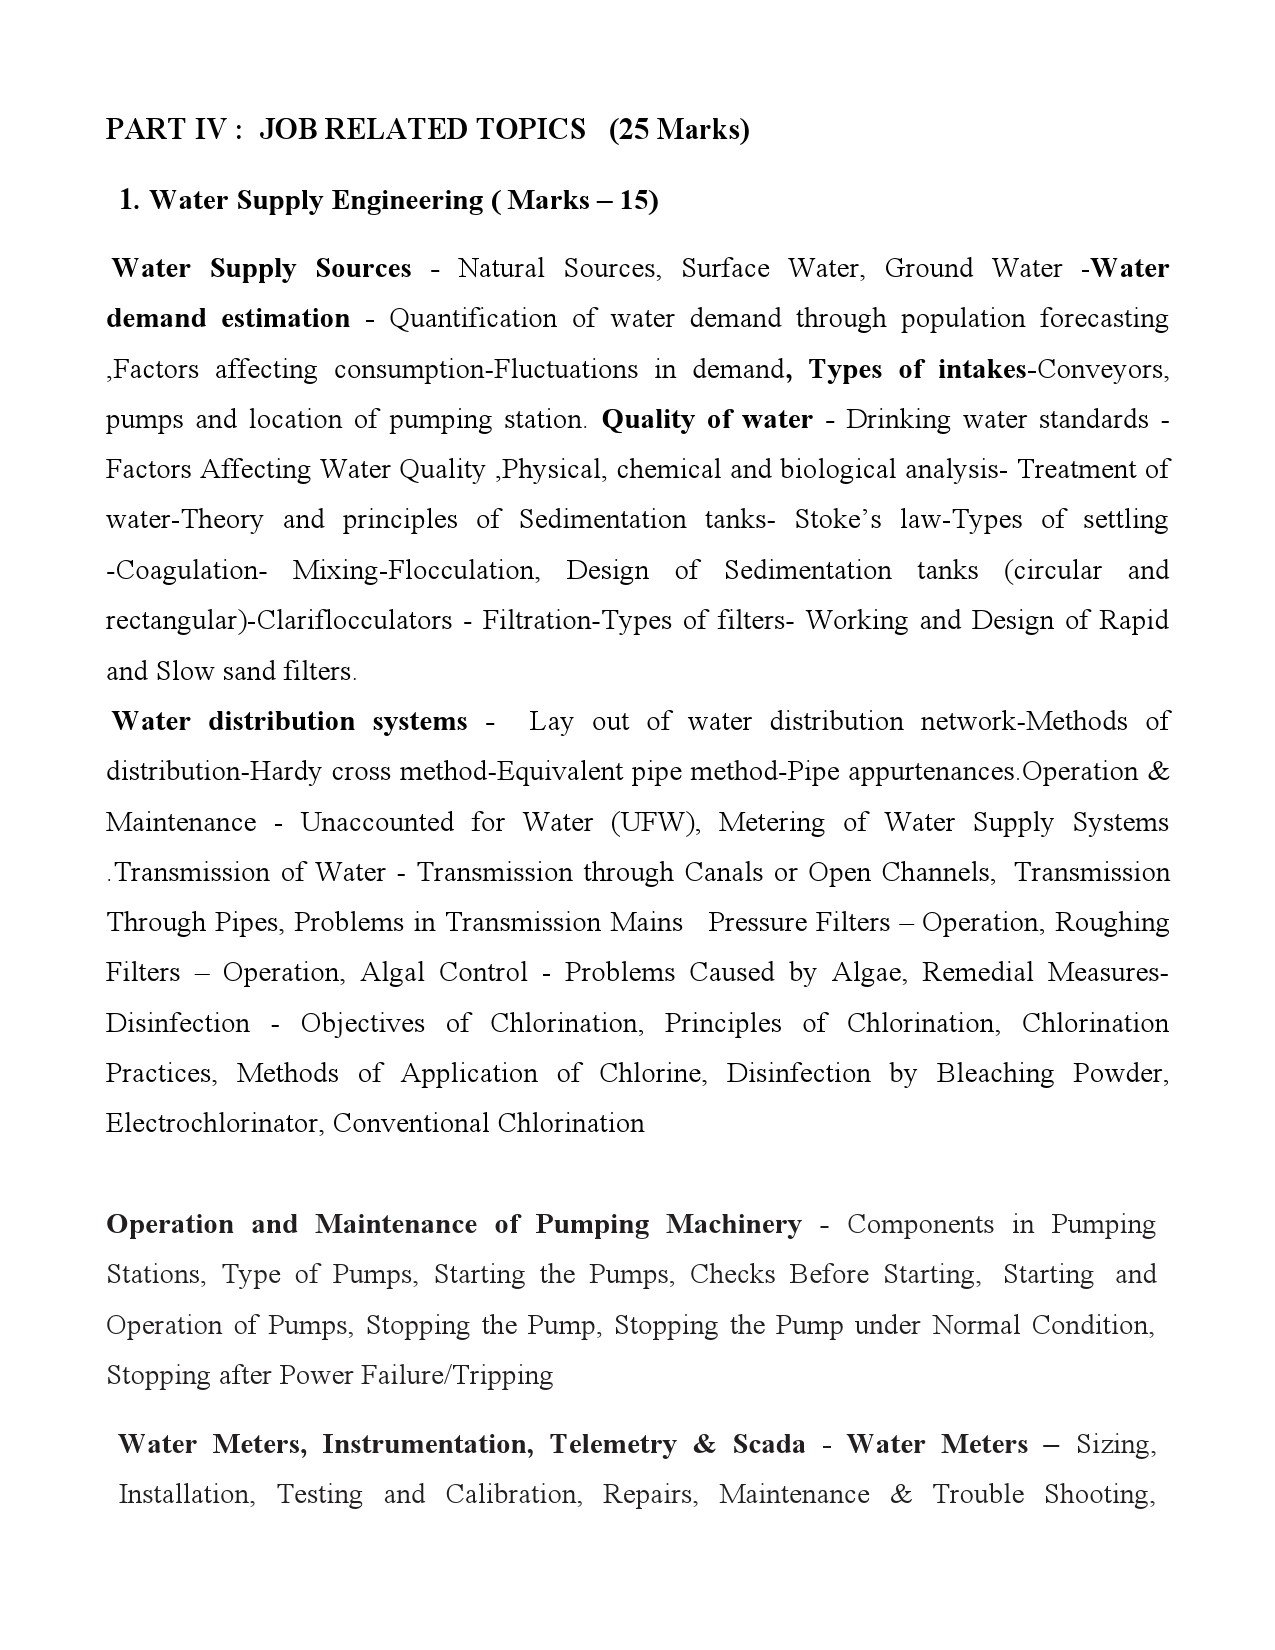 Syllabus For Assistant Engineer In Kerala Water Authority - Notification Image 10